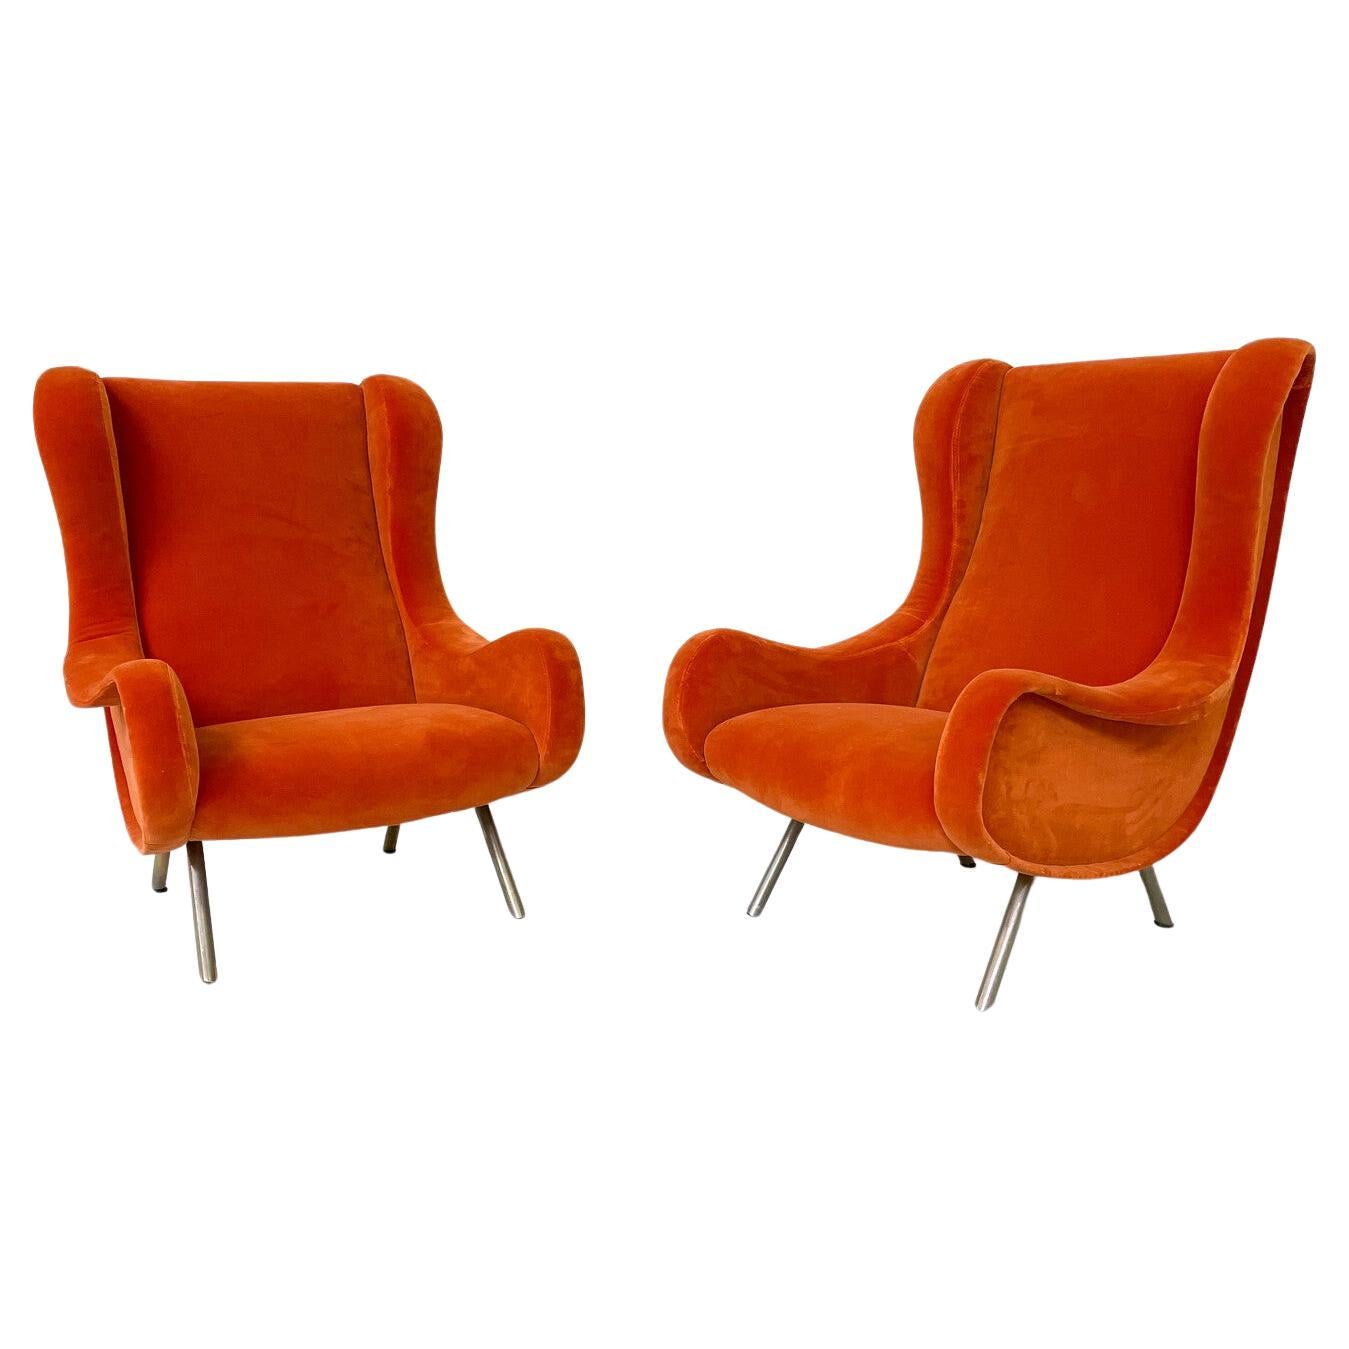 Mid-Century Modern Pair of Senior Armchairs by Marco Zanuso for Arlfex For Sale